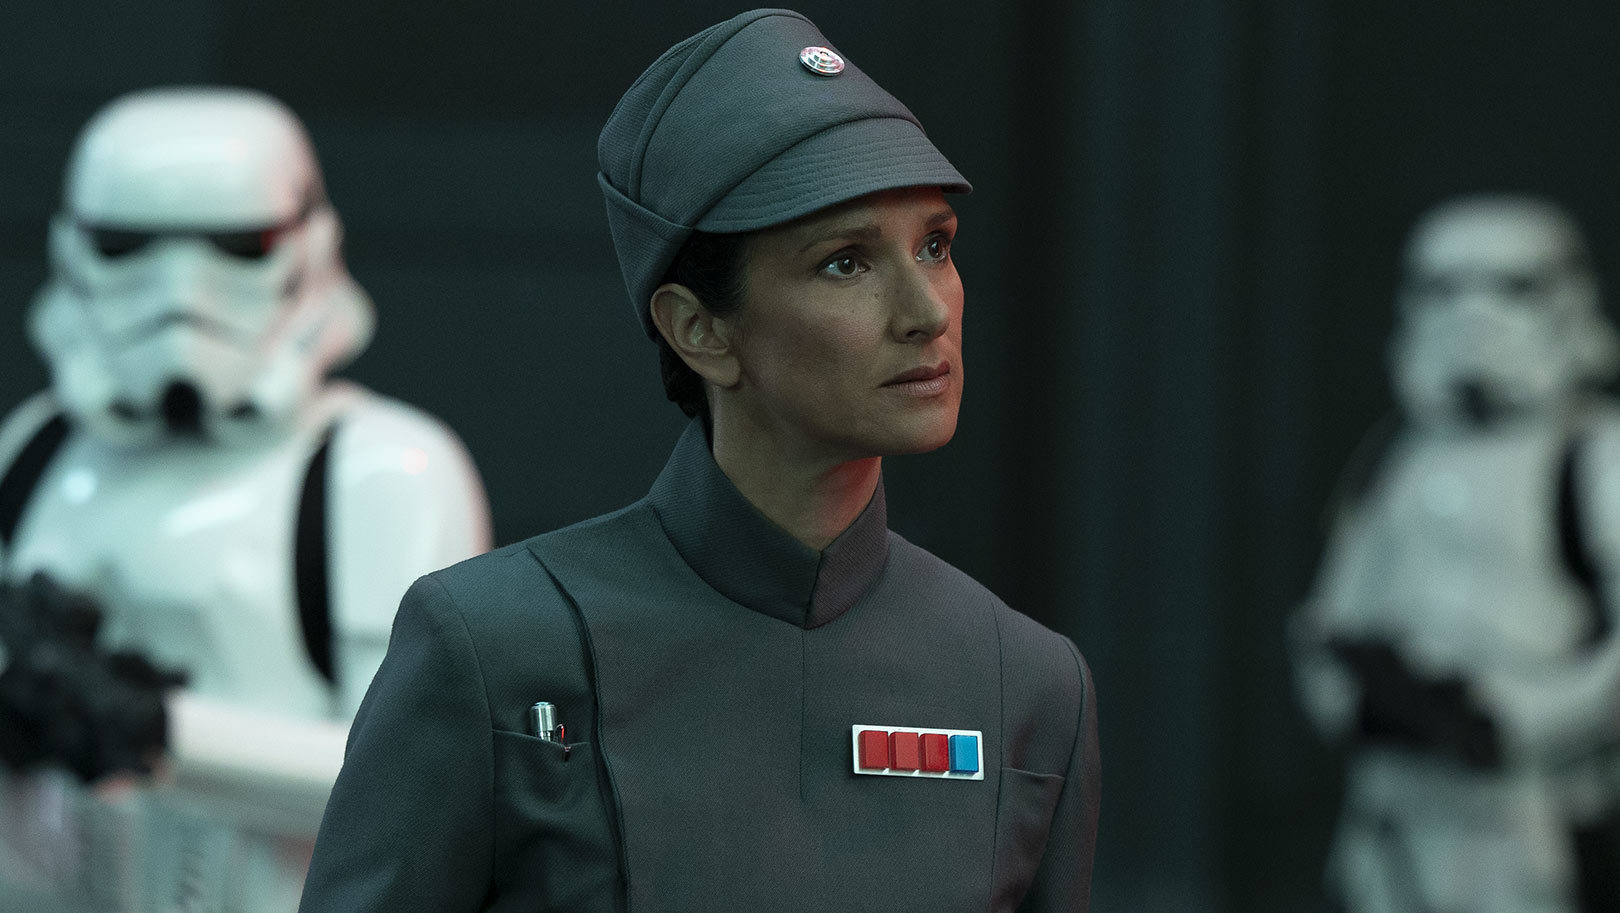 Tala, in her Imperial uniform, and Obi-Wan arrive at the Imperial headquarters. Tala passes throu...